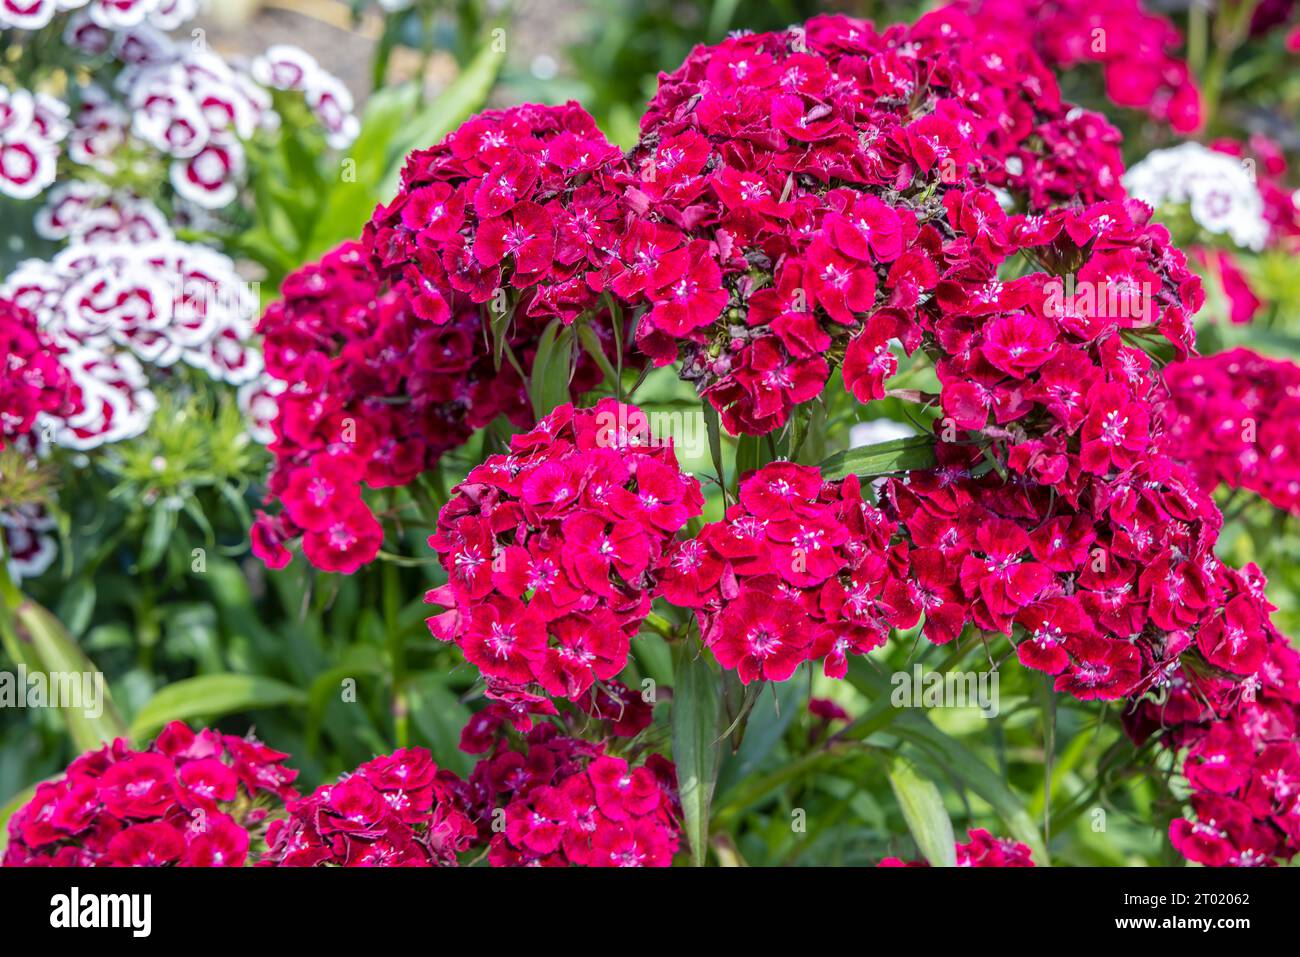 Red flowers of Dianthus barbatus, the sweet William, a species of flowering plant in the family Caryophyllaceae. Stock Photo